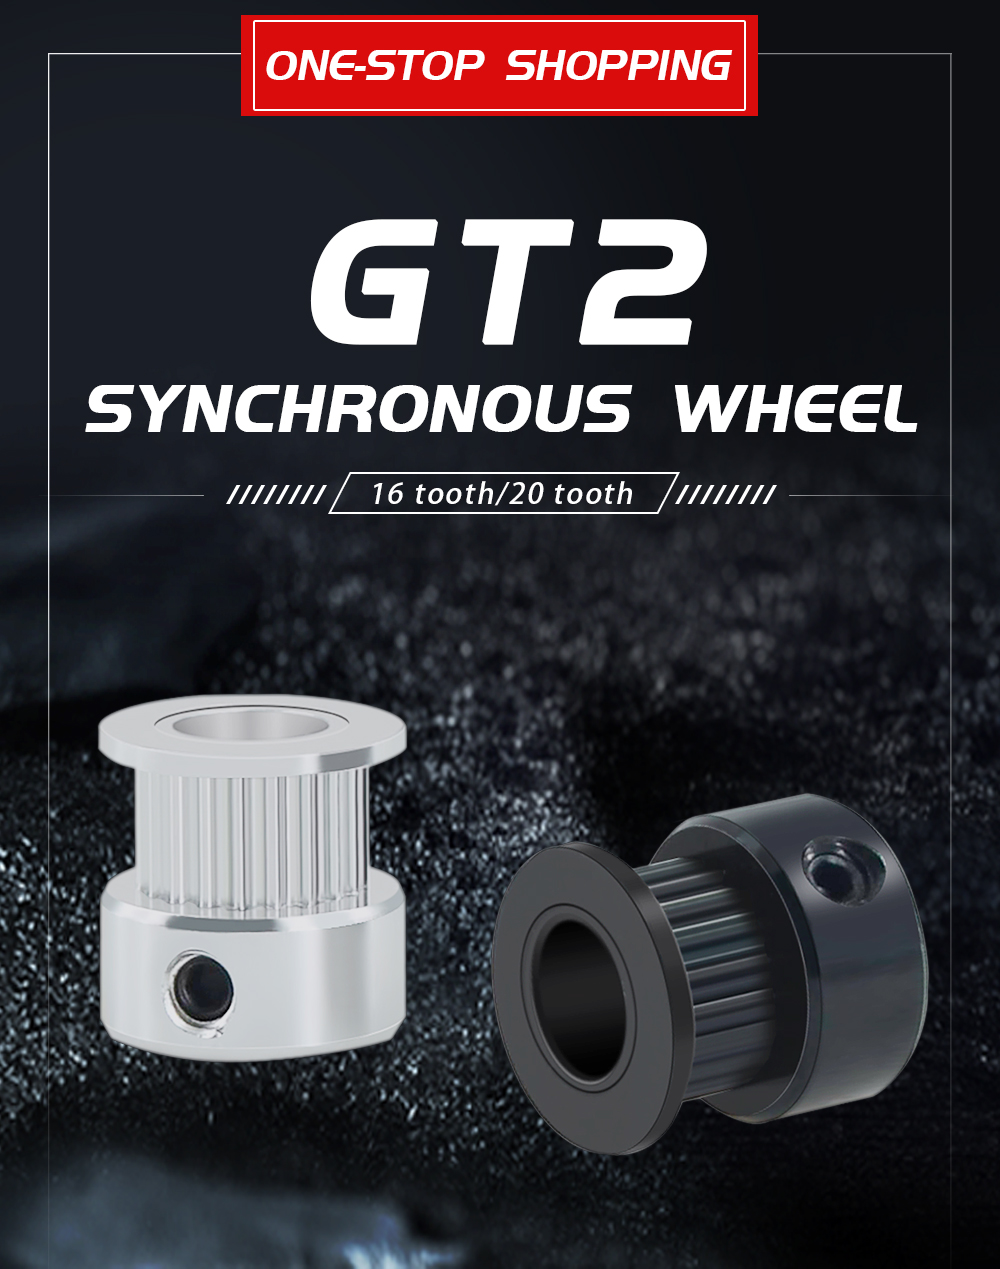 TWO-TREESreg-20-teeth-GT2-Timing-Pulley-Bore-5mm-635mm-8mm-for-Width-6mm-GT2-synchronous-belt-2GT-Be-1927640-1